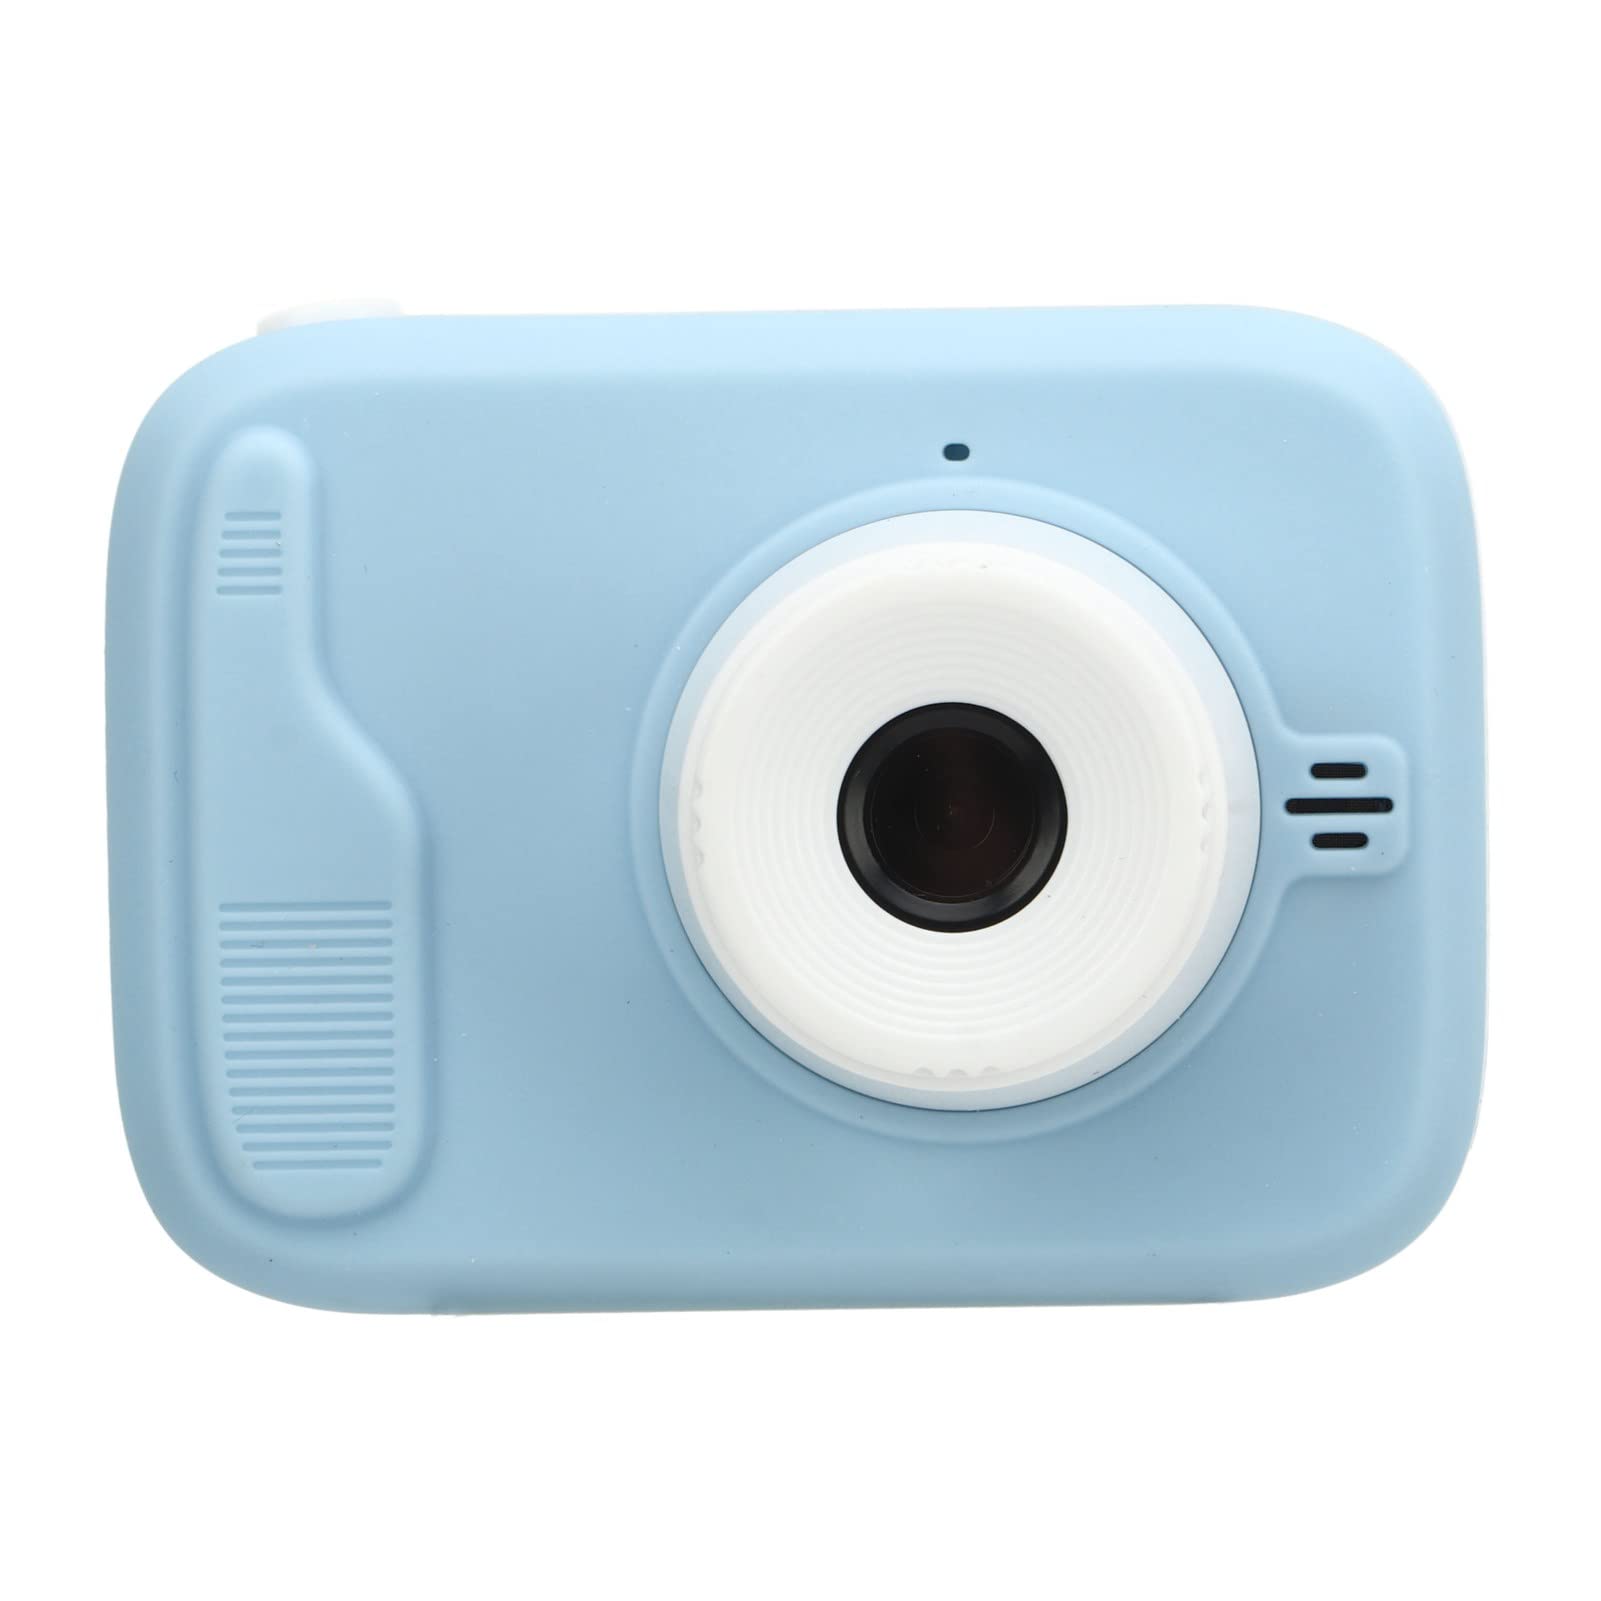 Kids Camera, 20MP Dual Front Rear Cameras Children Camera Various Filter Functions Portable with Flash Light for Outdoor (Blue)